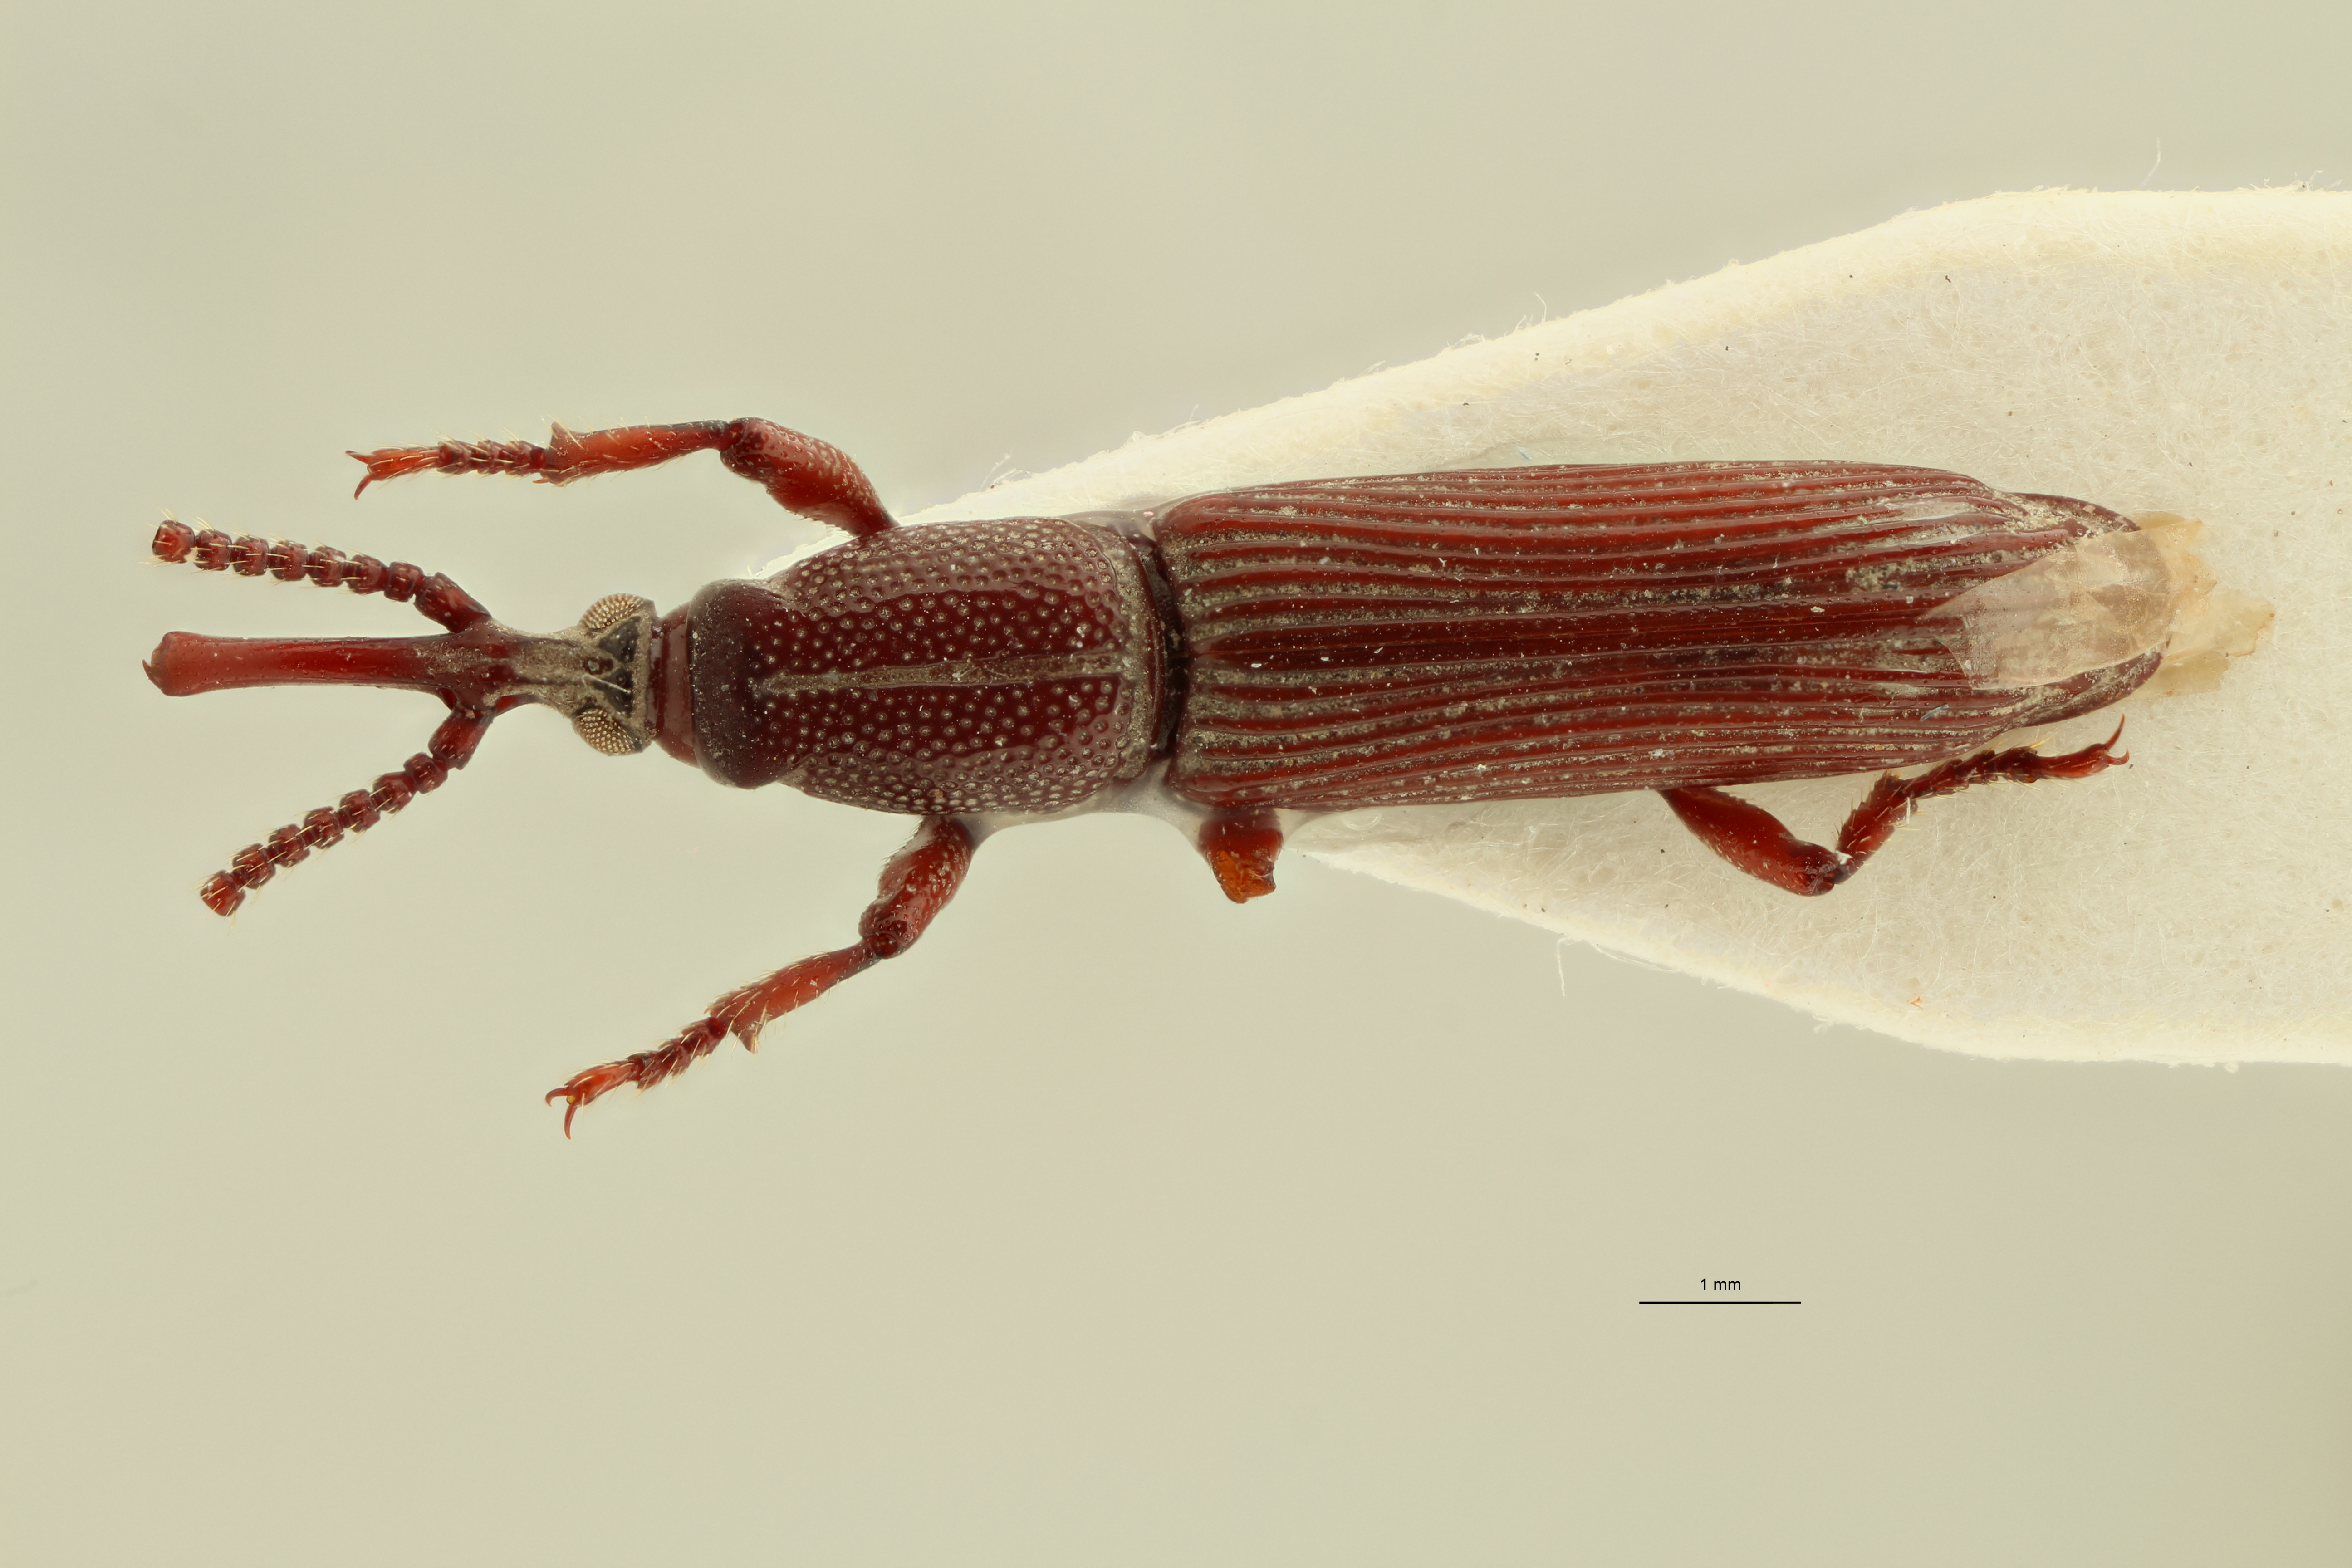 Neoceocephalus thoracicus t D ZS PMax.jpg